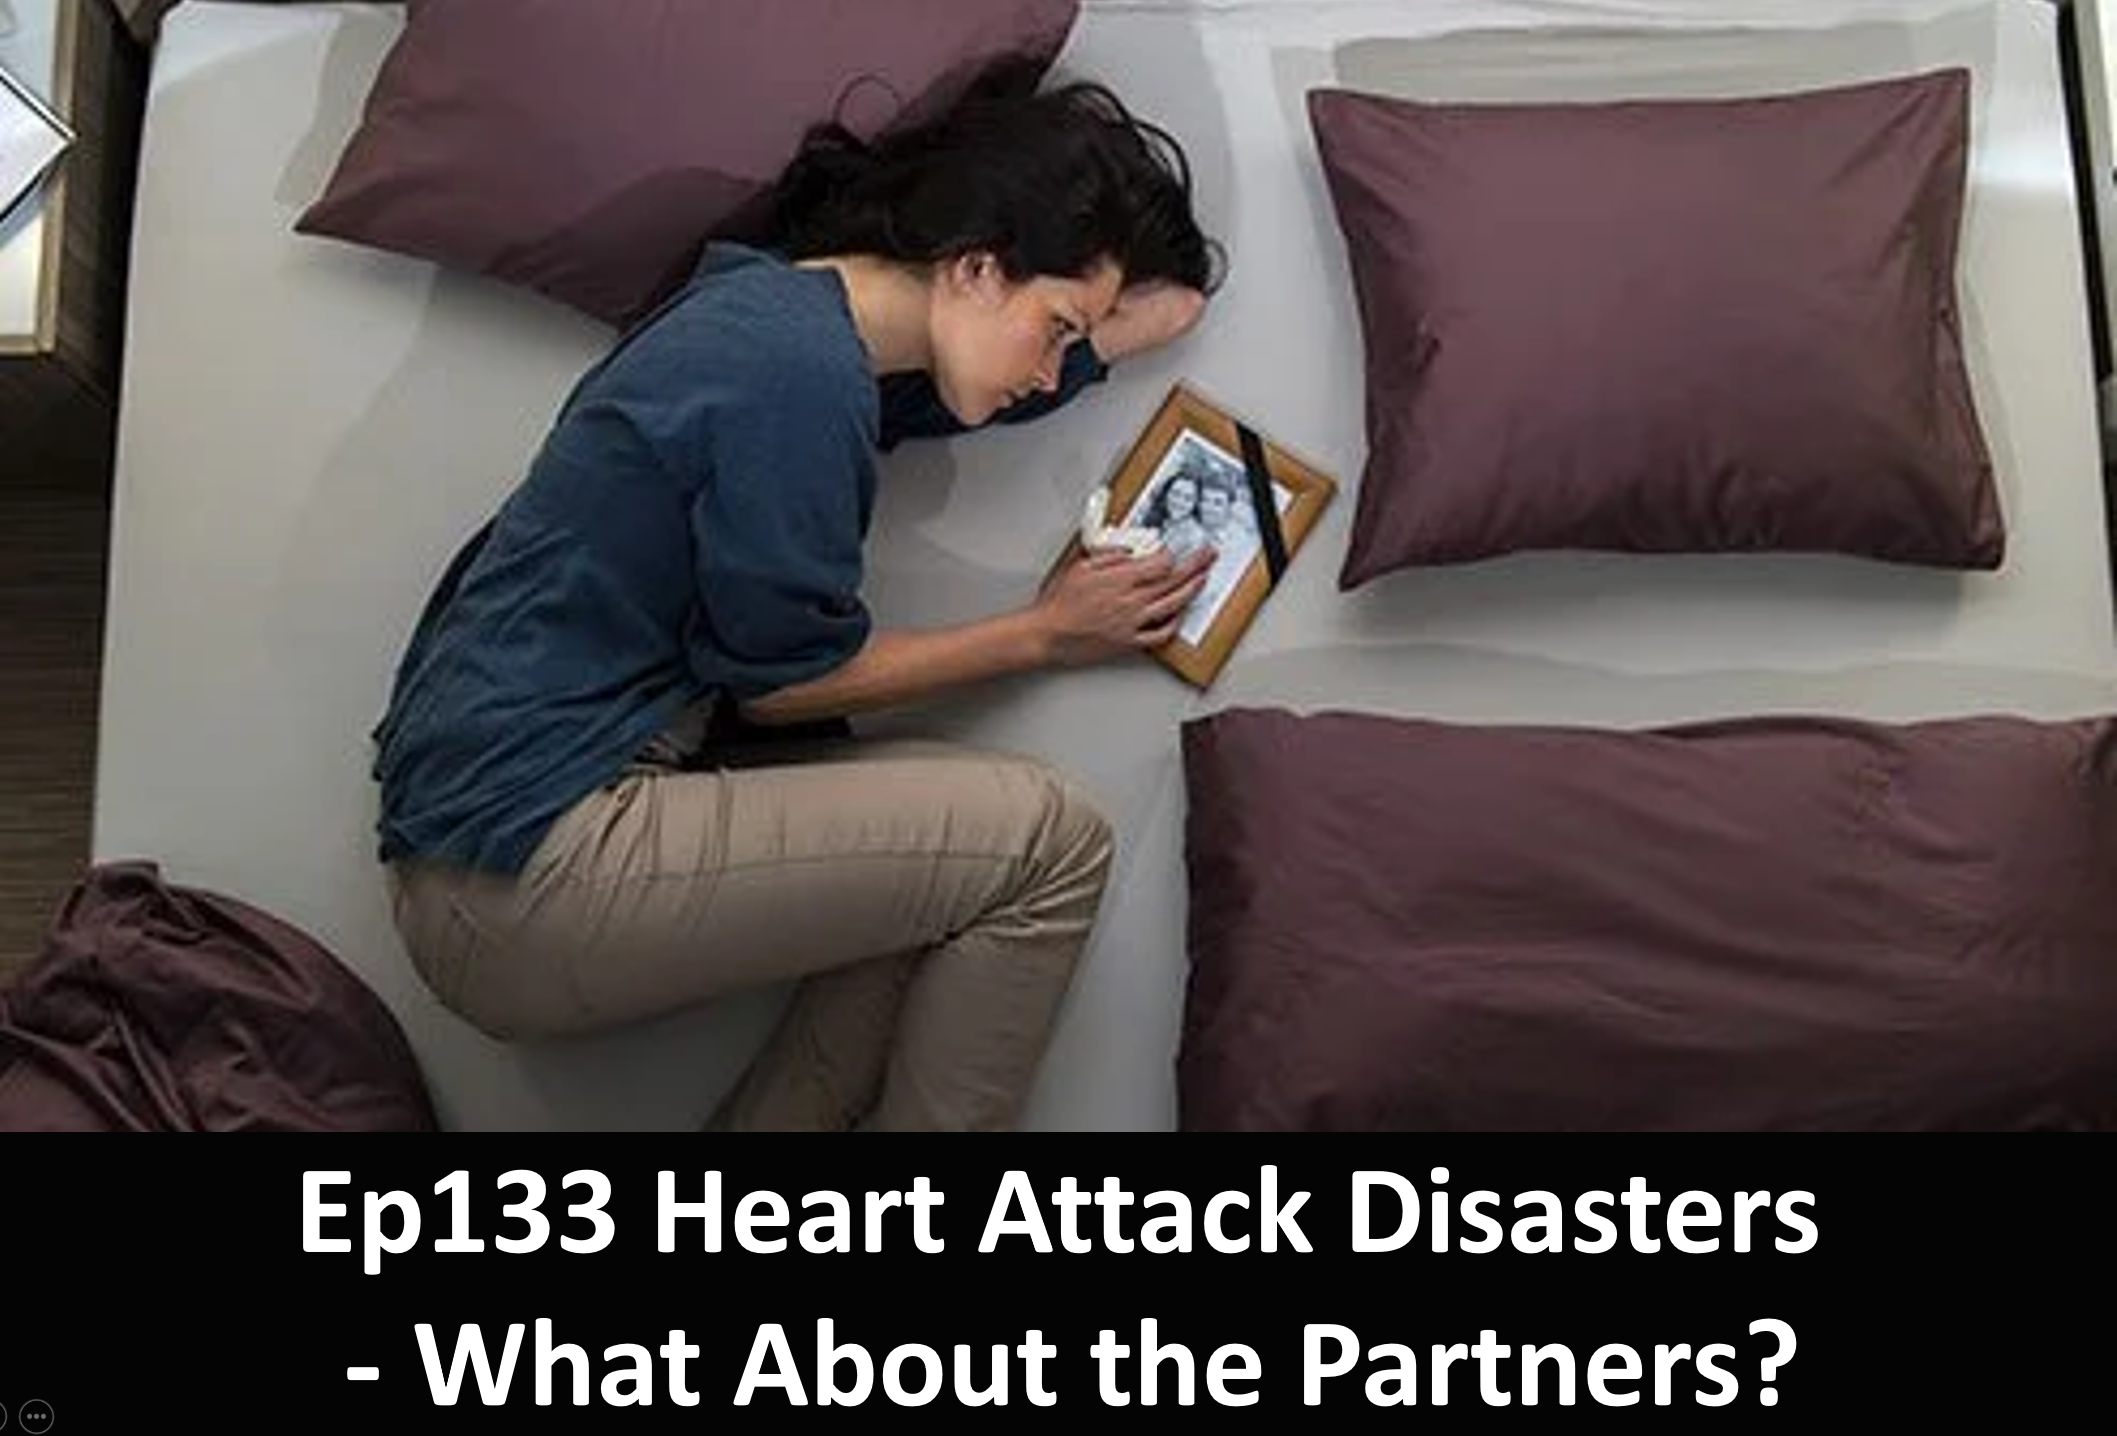 Ep133 Heart Attack Disasters - What About the Partners